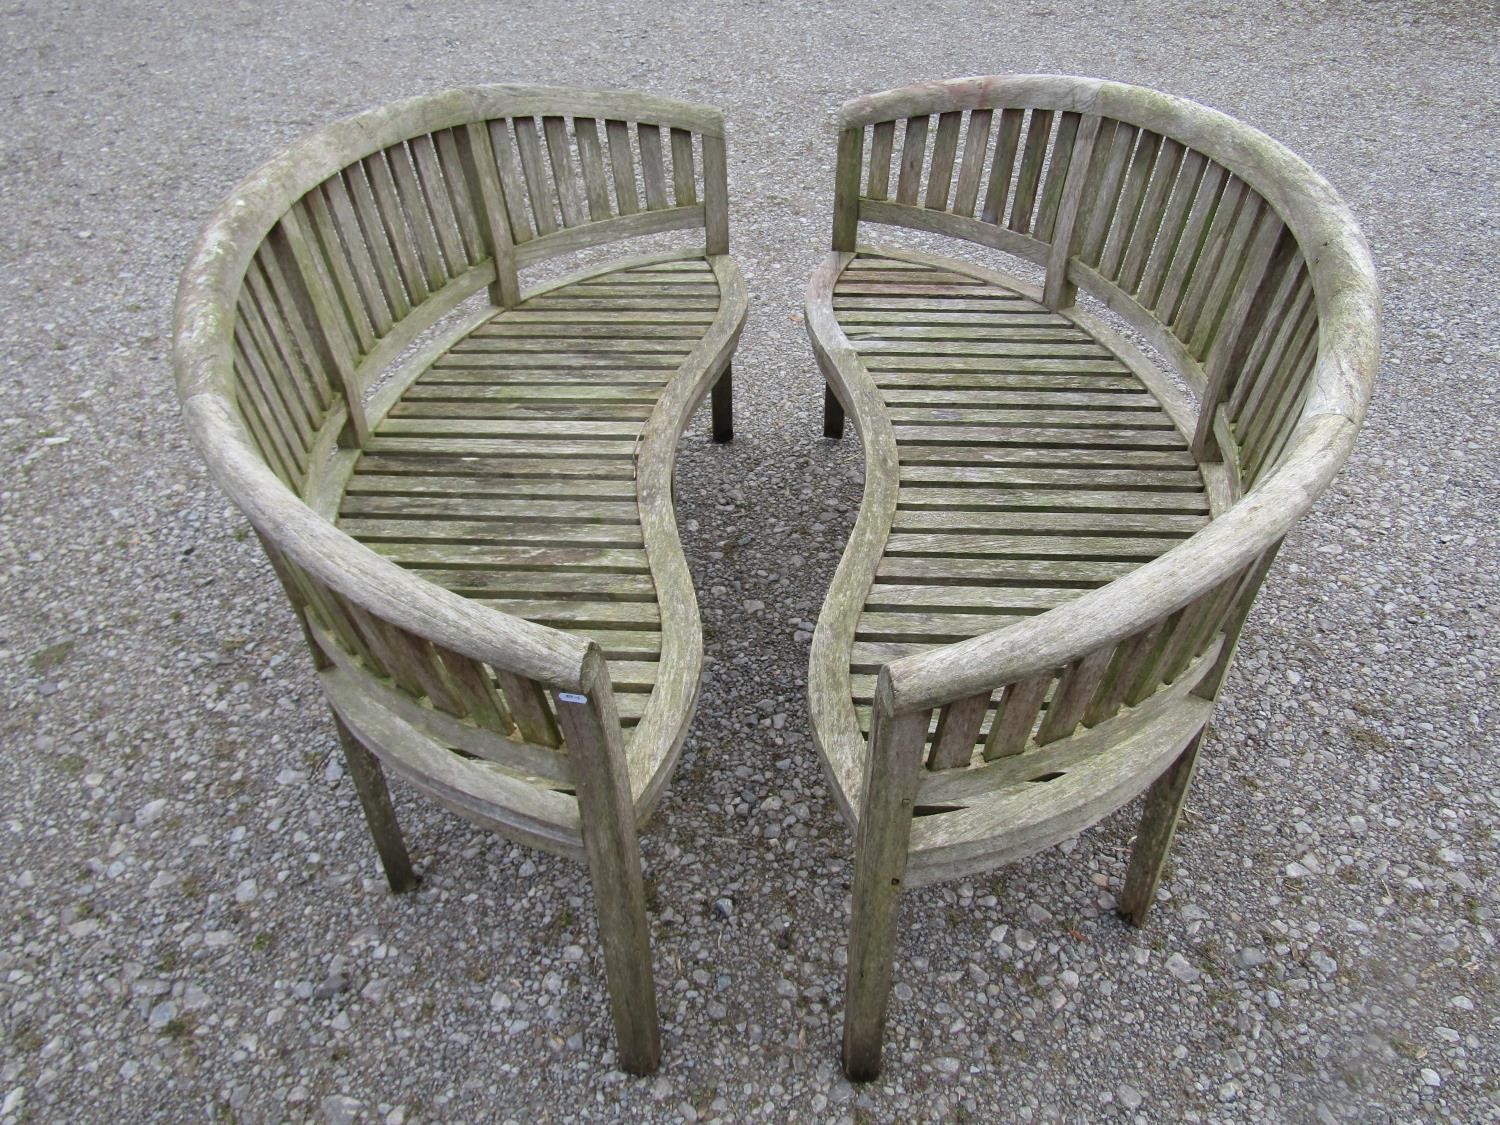 A pair of weathered teak banana shaped garden benches with loose seat cushions, 160 cm wide